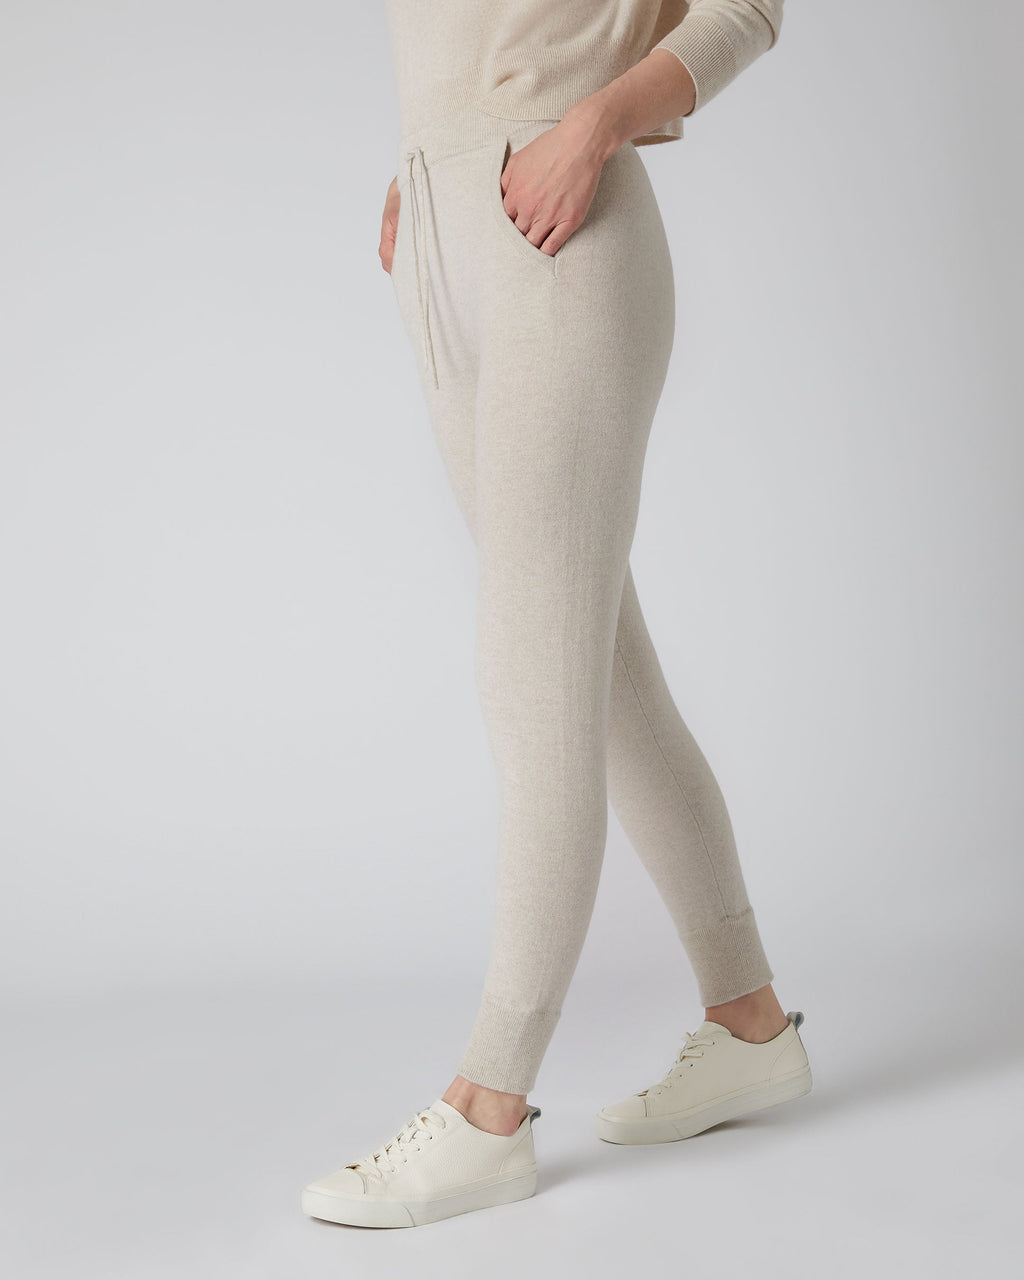 Womens Cashmere Leggings and Pants